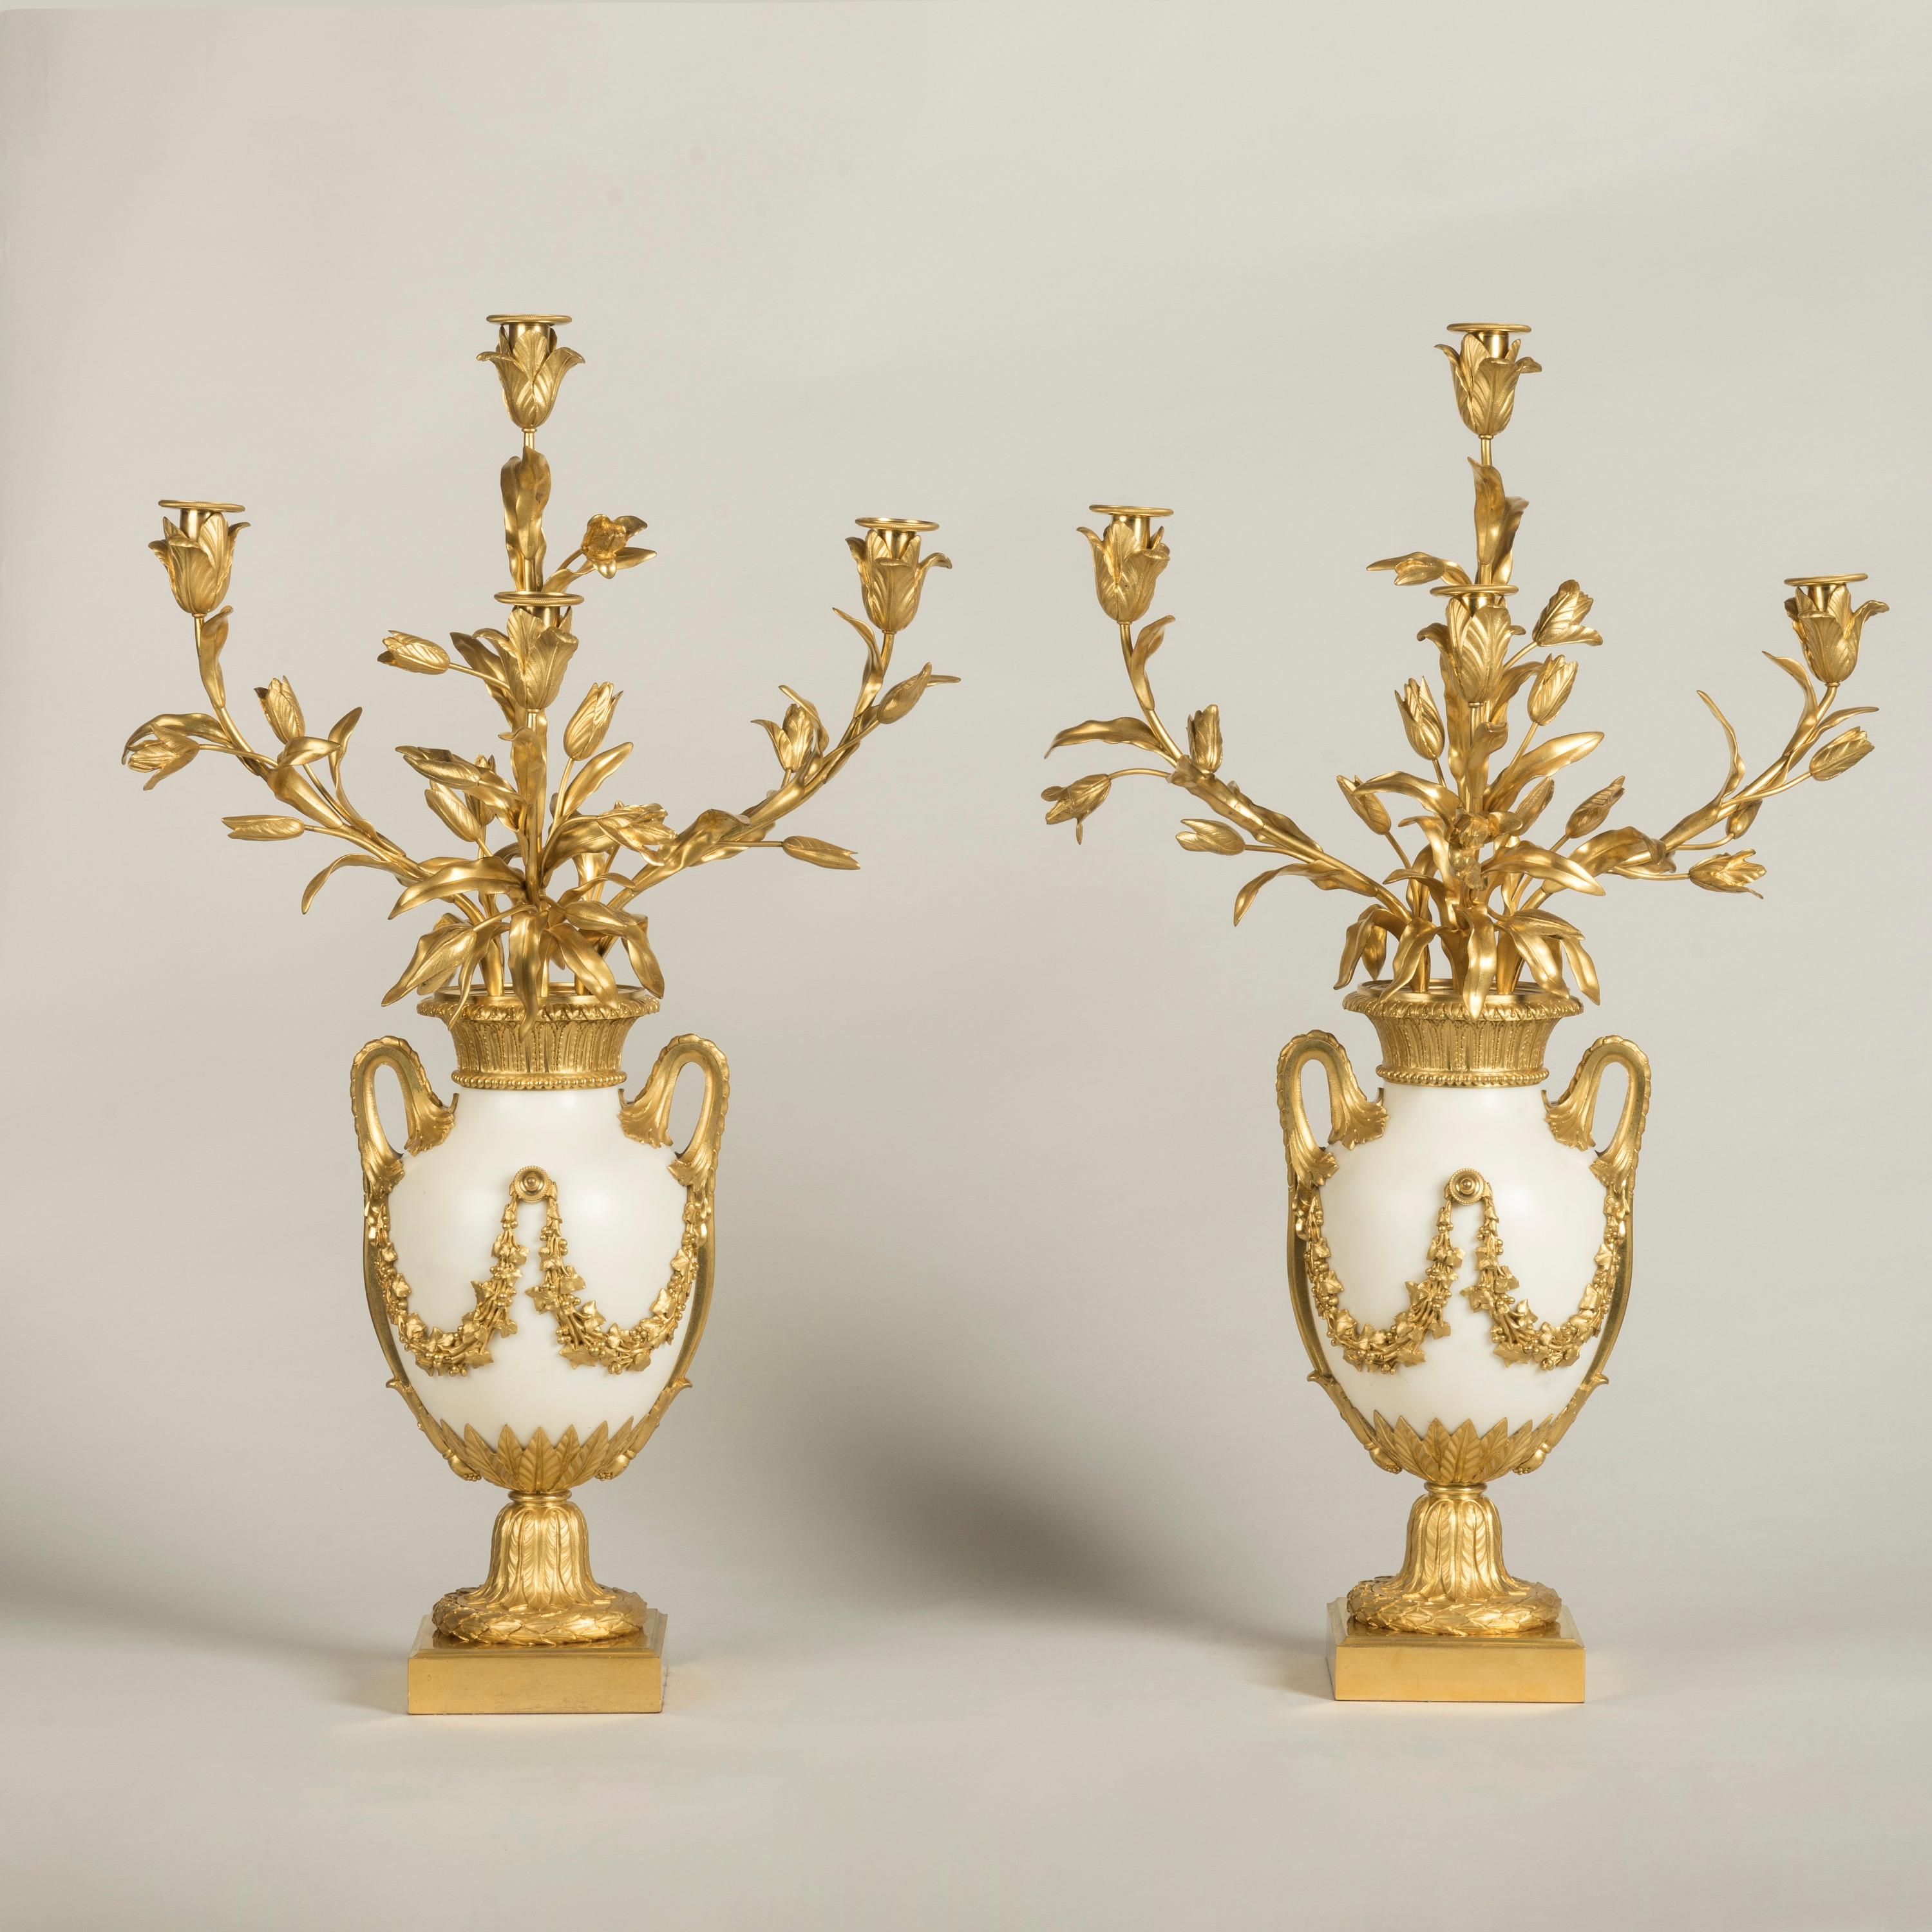 A Fine Pair of Ormolu-Mounted Candelabra 
in the Louis XVI Manner

Constructed from Carrara marble with mercury gilded mounts, the vases are supported on square bases with laurel-wreathed socles; the marble ovoid bodies with ormolu foliate twinned